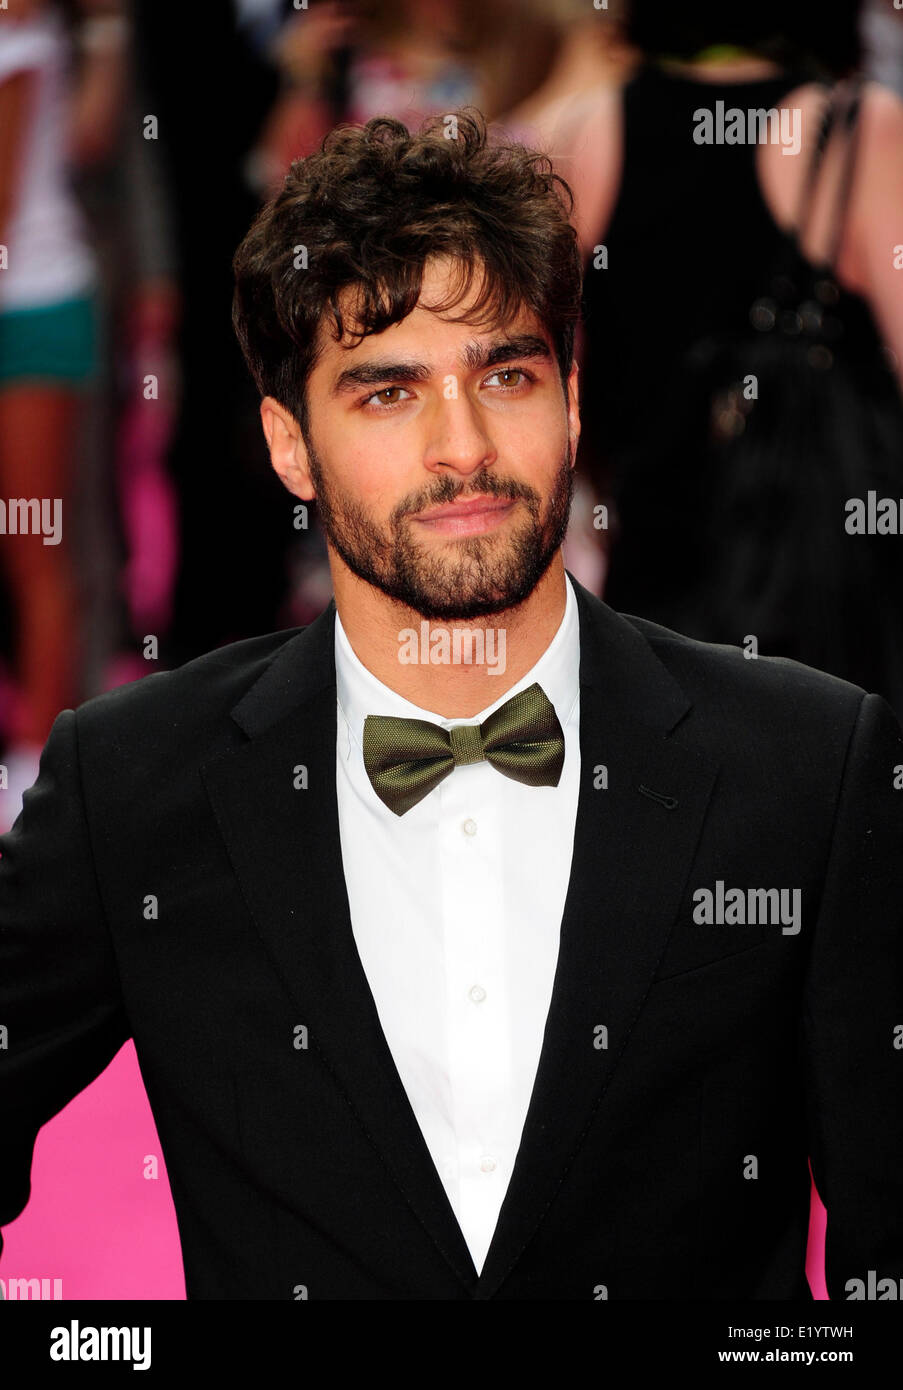 London, UK. 11th June, 2014. Giulio Corso attend the World Premiere of  Walking on Sunshine at the Vue West End London 11 June 2014. Credit: Peter  Phillips/Alamy Live News Stock Photo - Alamy